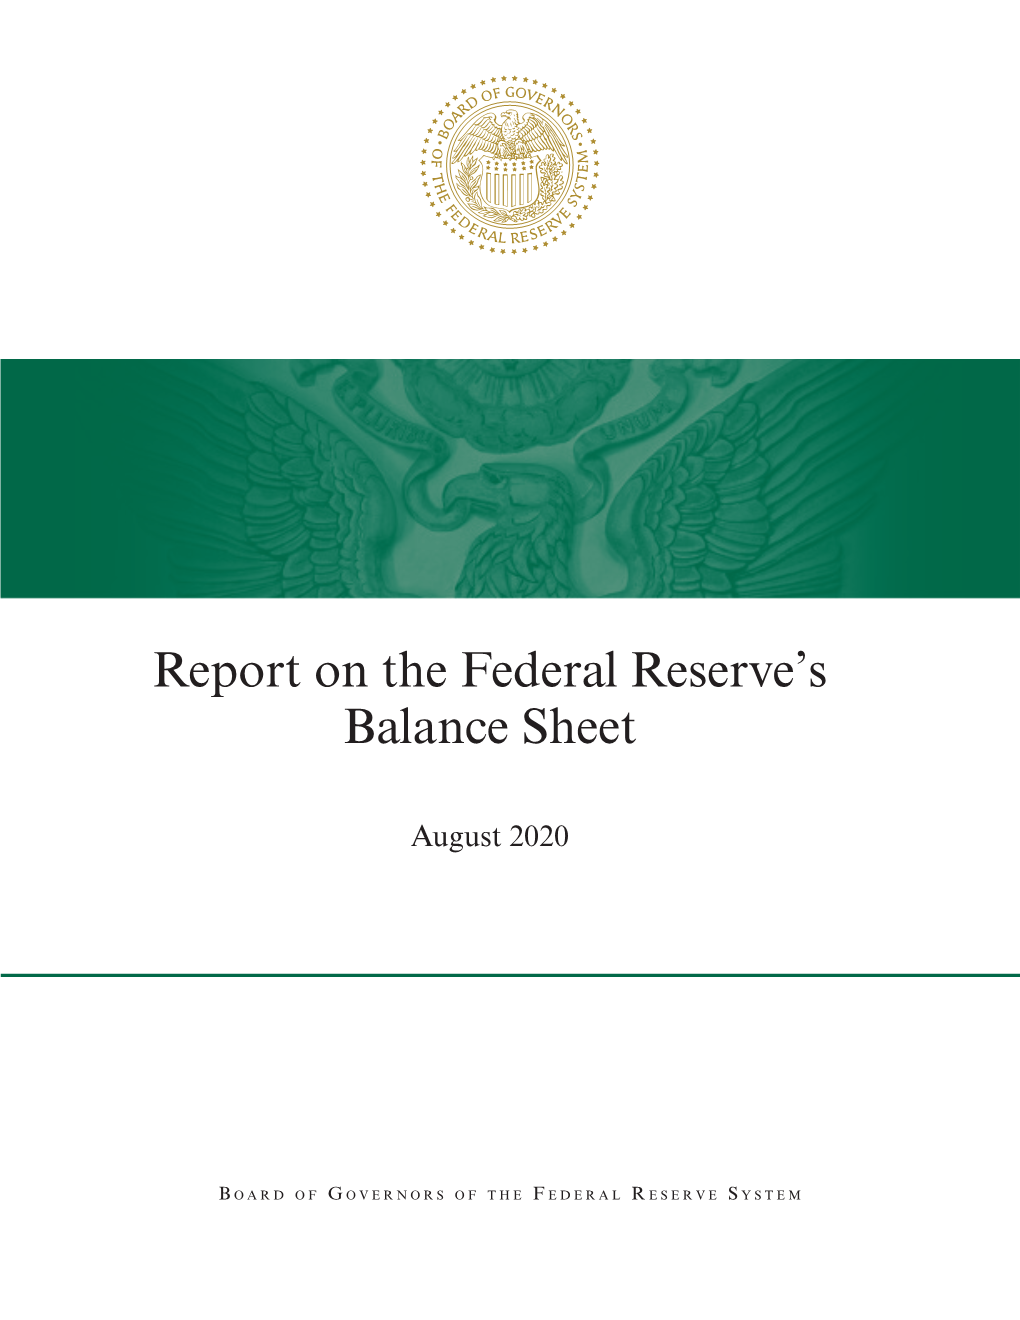 Report on the Federal Reserve's Balance Sheet, August 2020